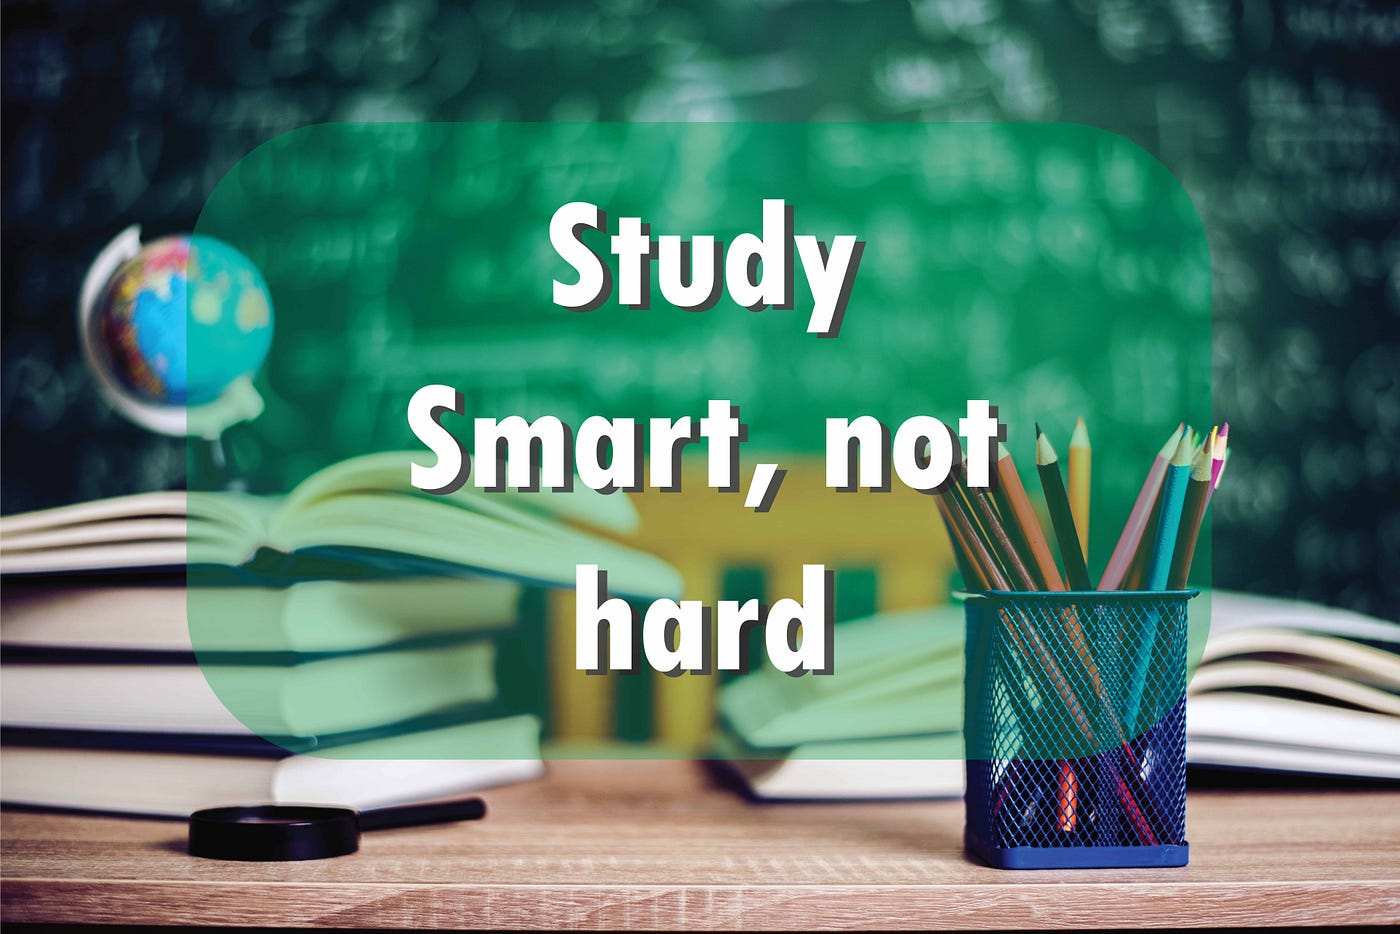 study smarter rather than studying longer